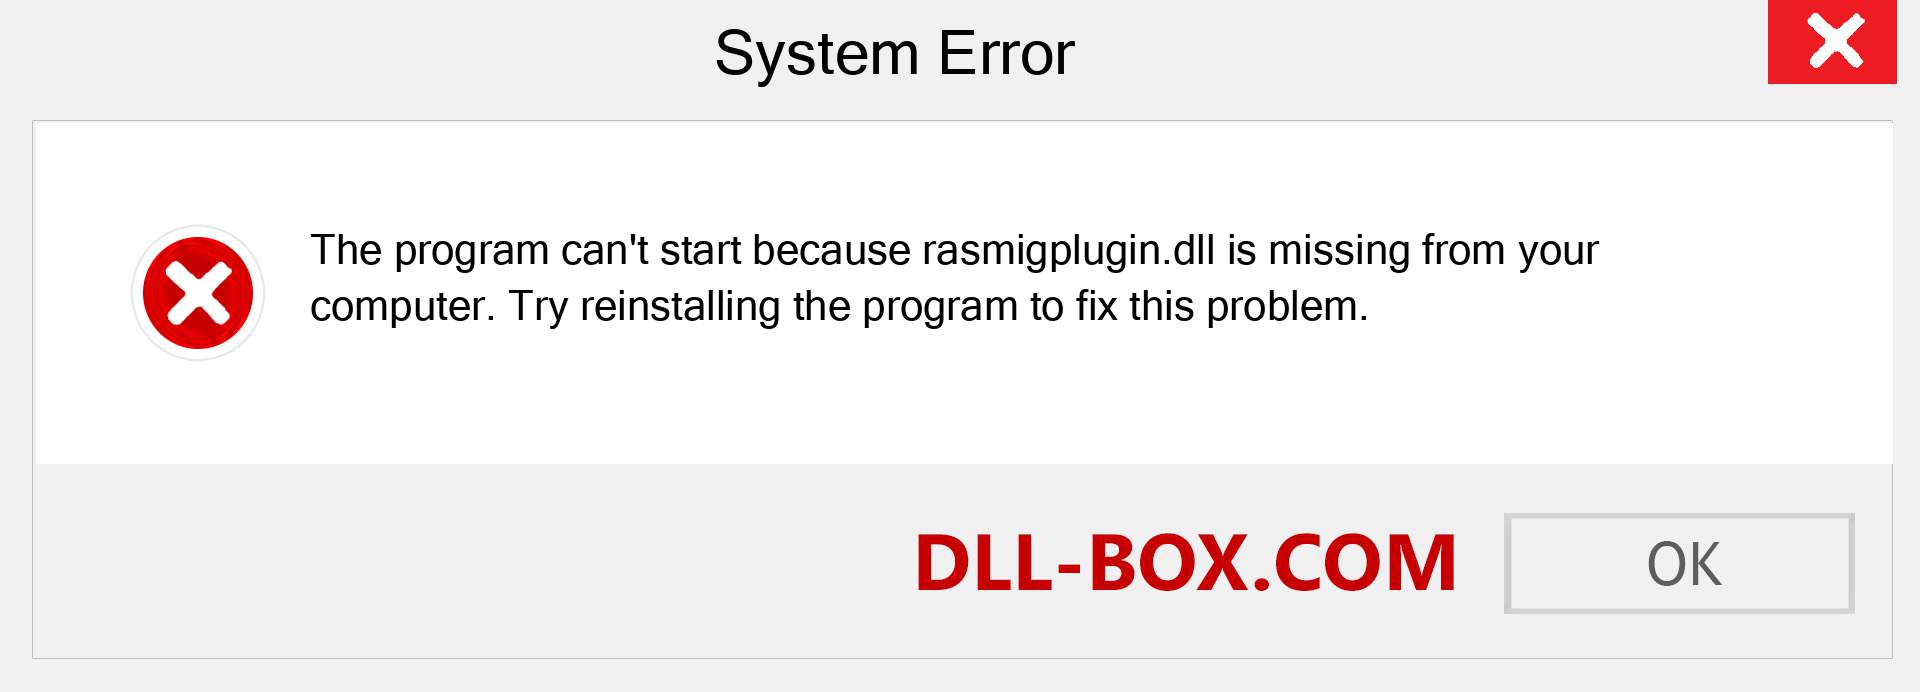  rasmigplugin.dll file is missing?. Download for Windows 7, 8, 10 - Fix  rasmigplugin dll Missing Error on Windows, photos, images